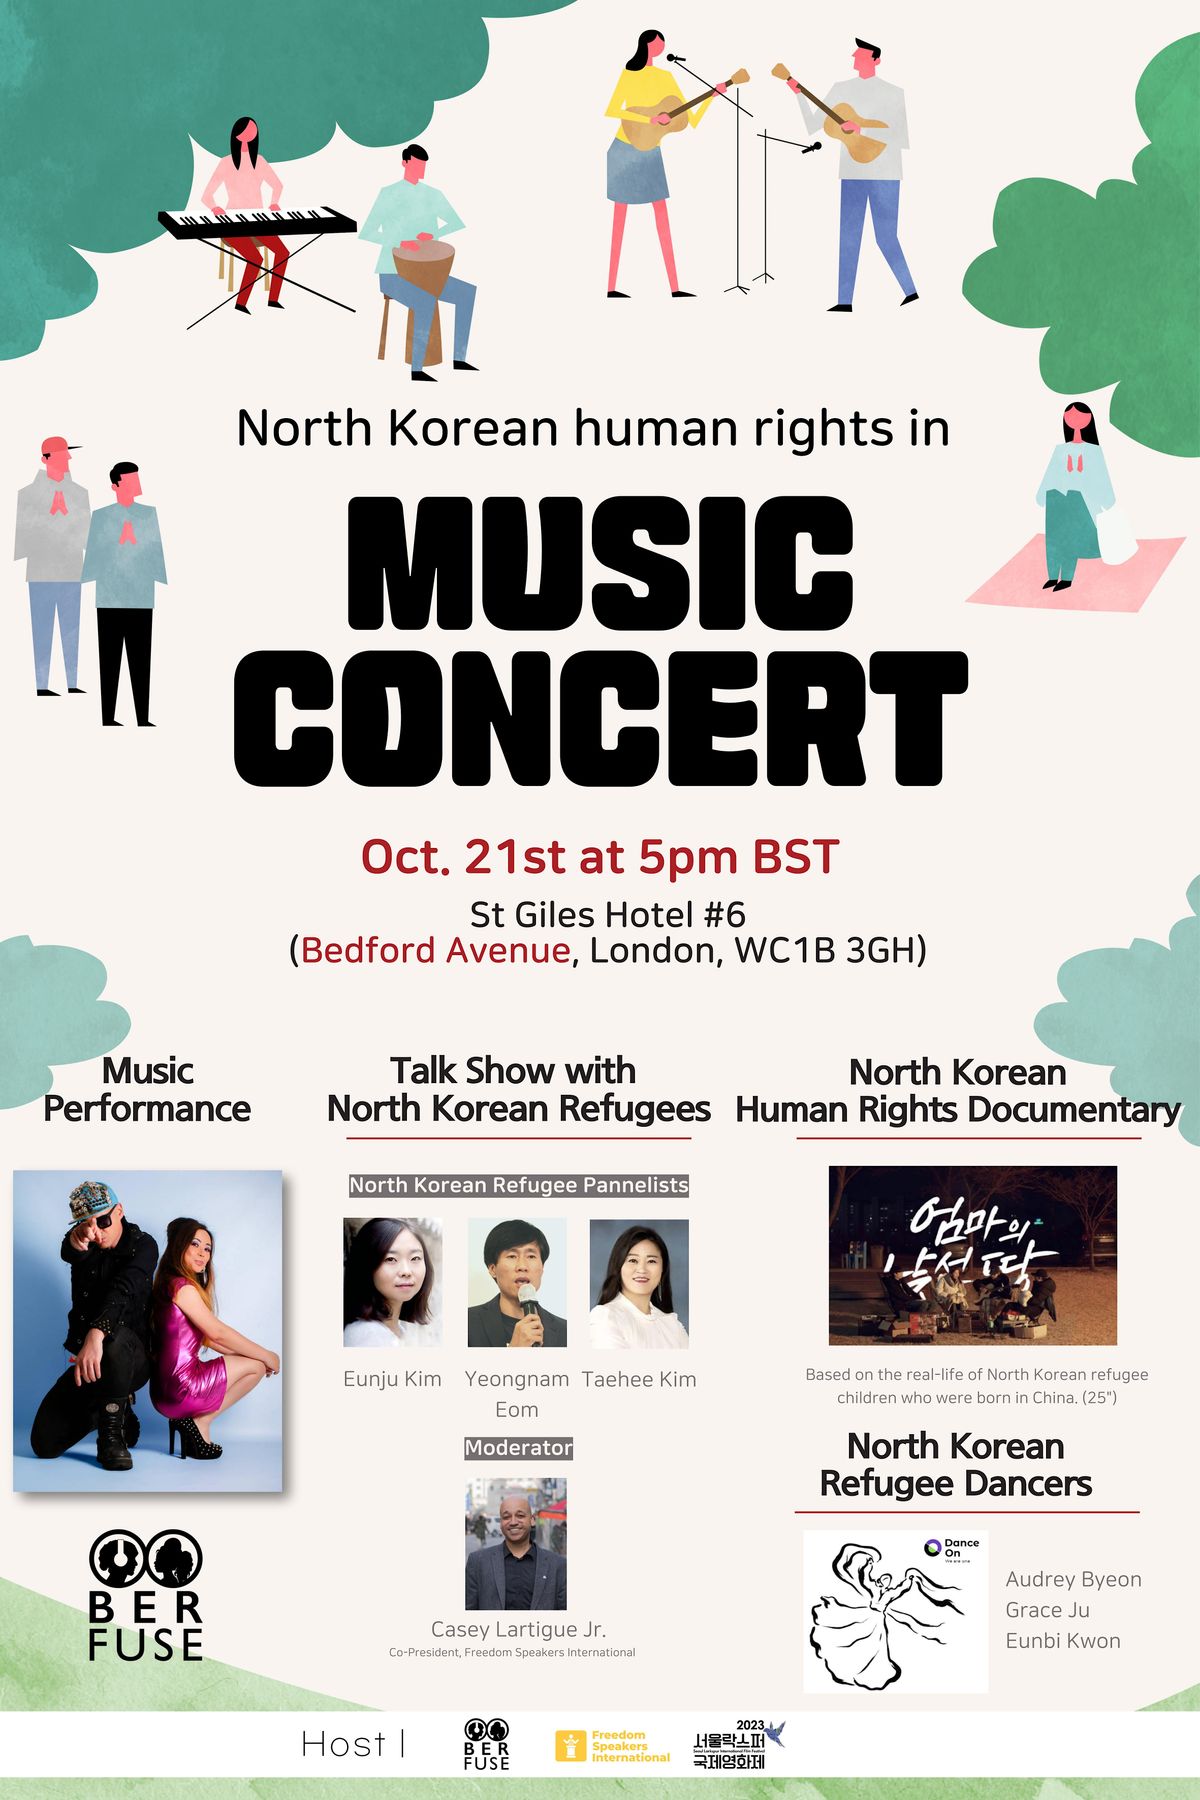 Music concert in London for North Korean human rights